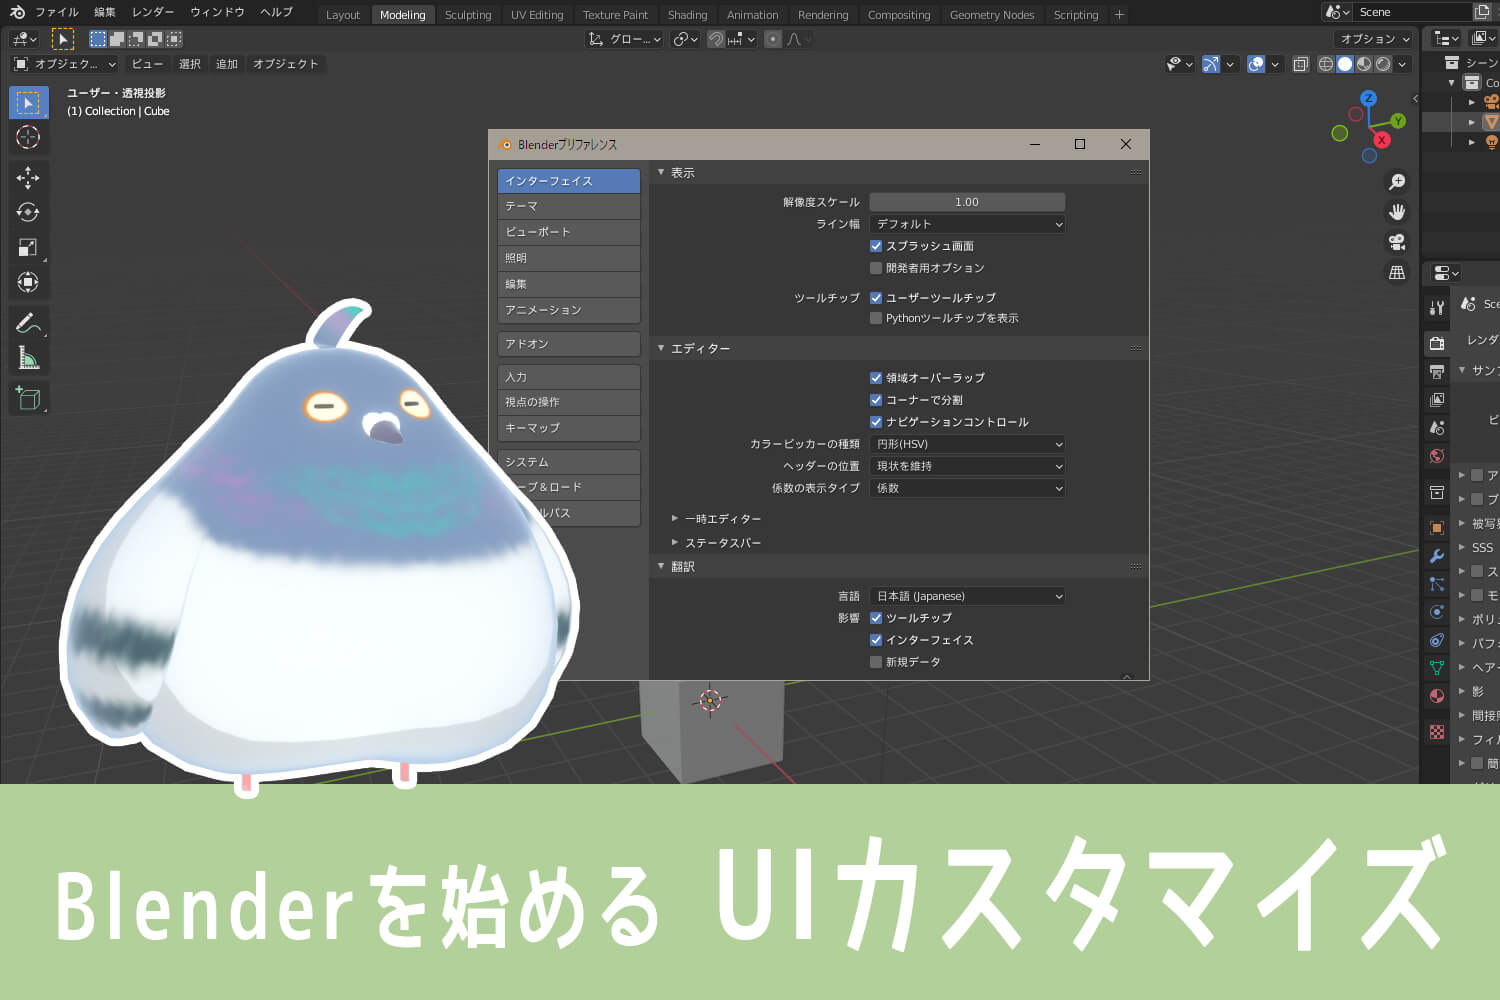 START Blender 1) - Customize UI and Make It Easy to Use